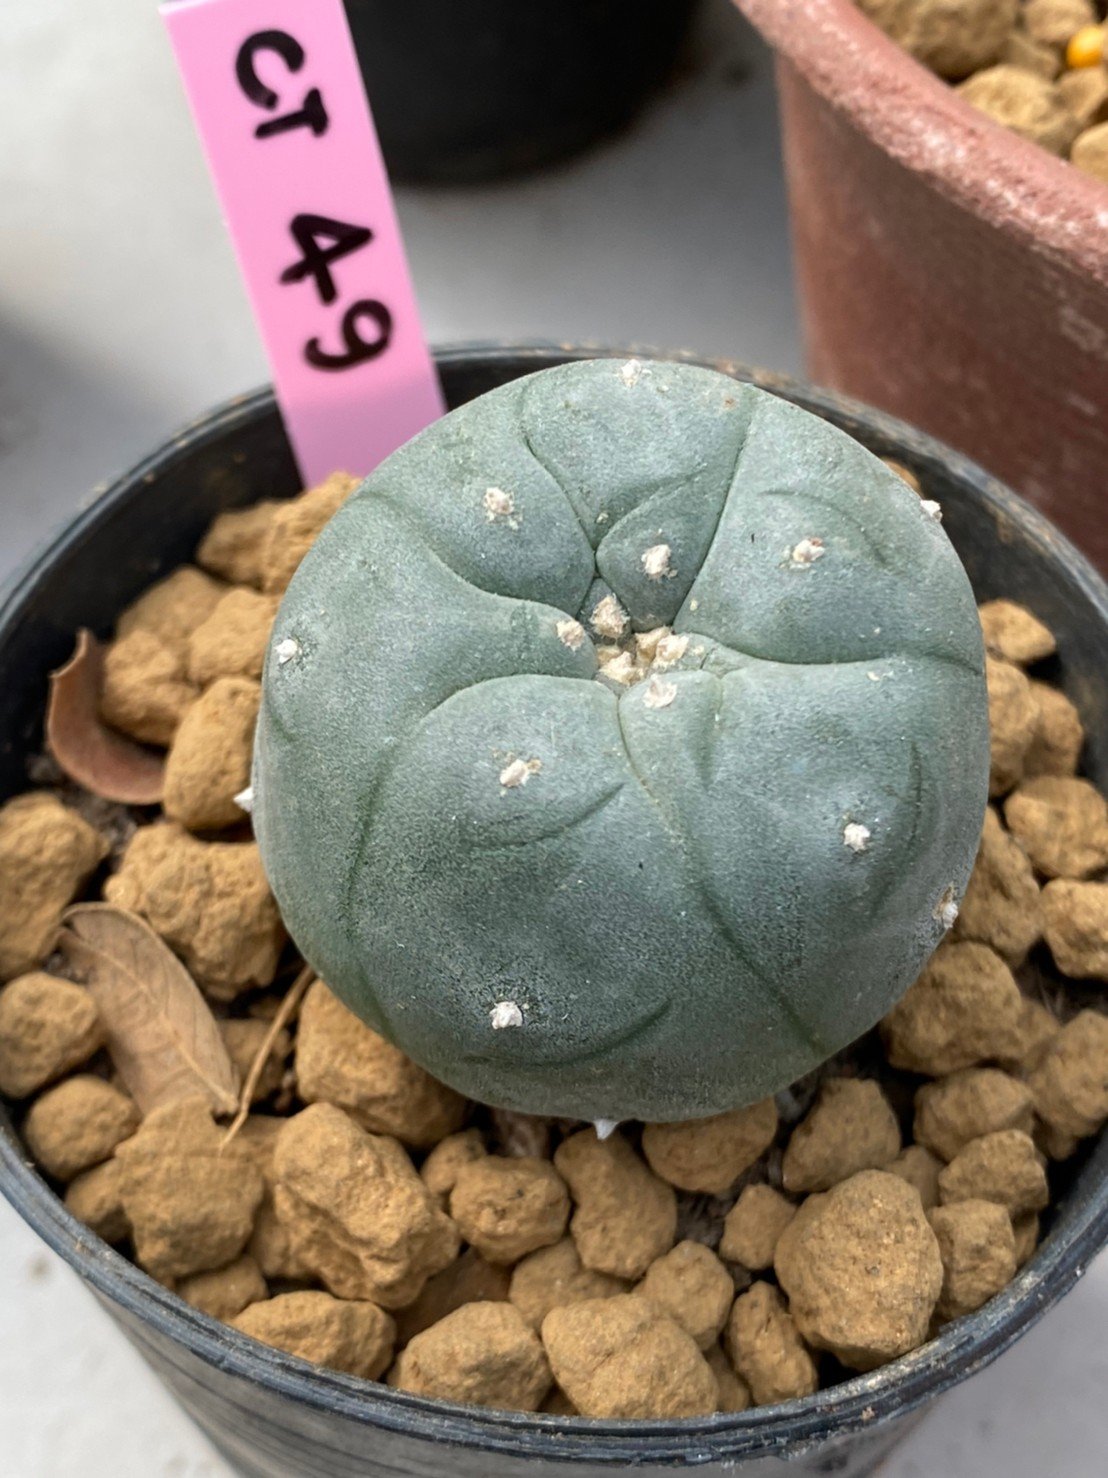 Lophophora williamsii 4 cm 6 years old ownroot grow from seed